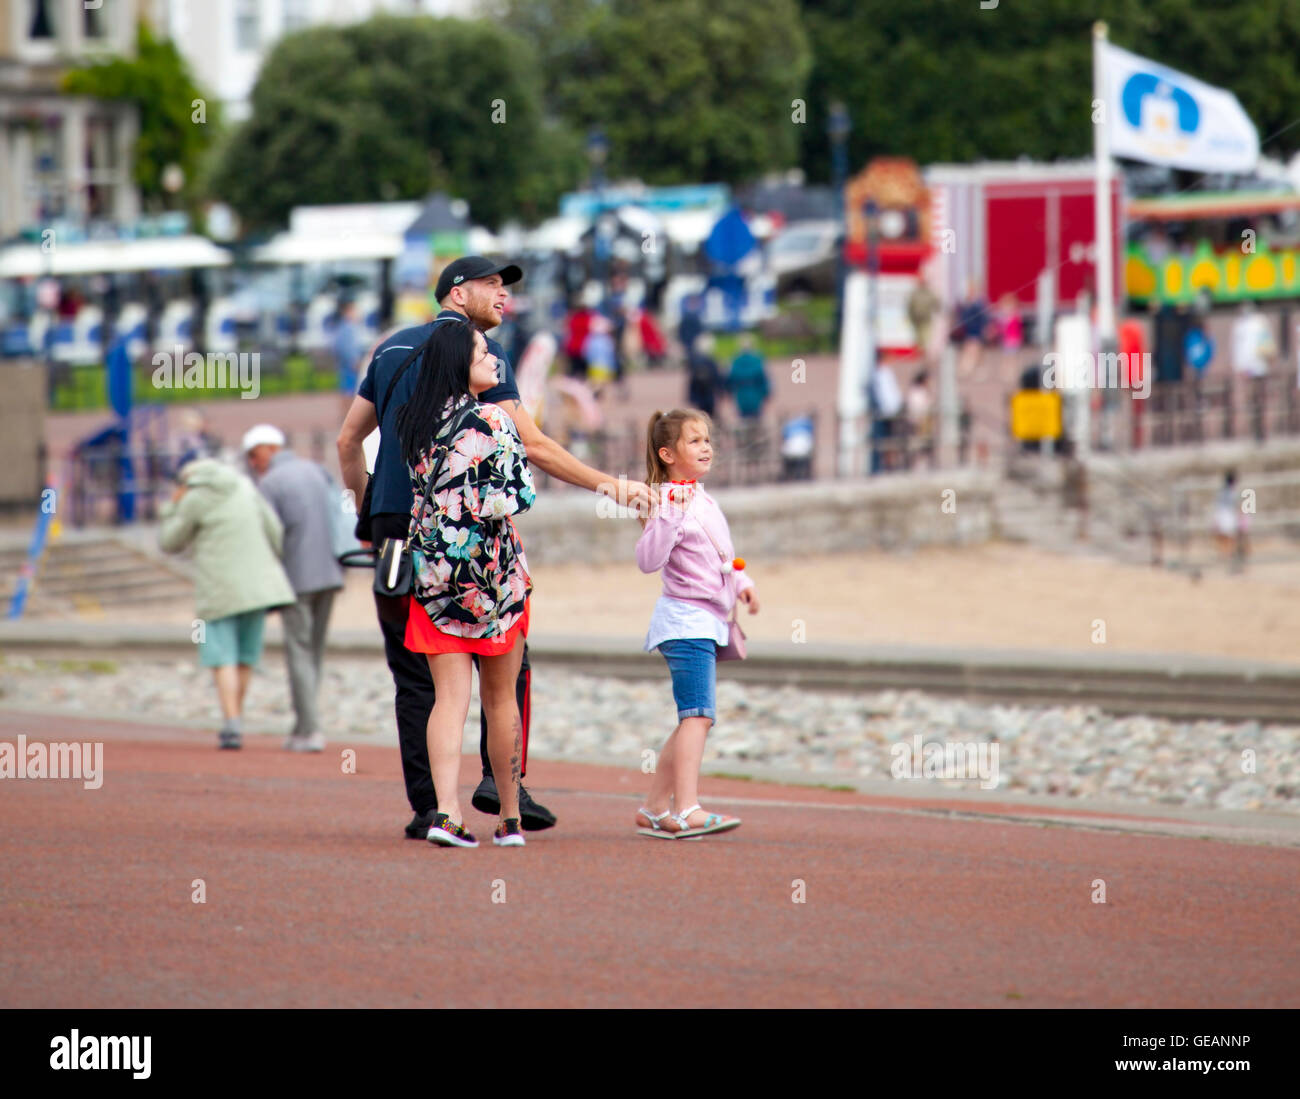 A young family walking down the coastal promenade at Llandudno in North Wales in summer with a young girl looking towards the kite she is holding in the air, Wales, UK Stock Photo